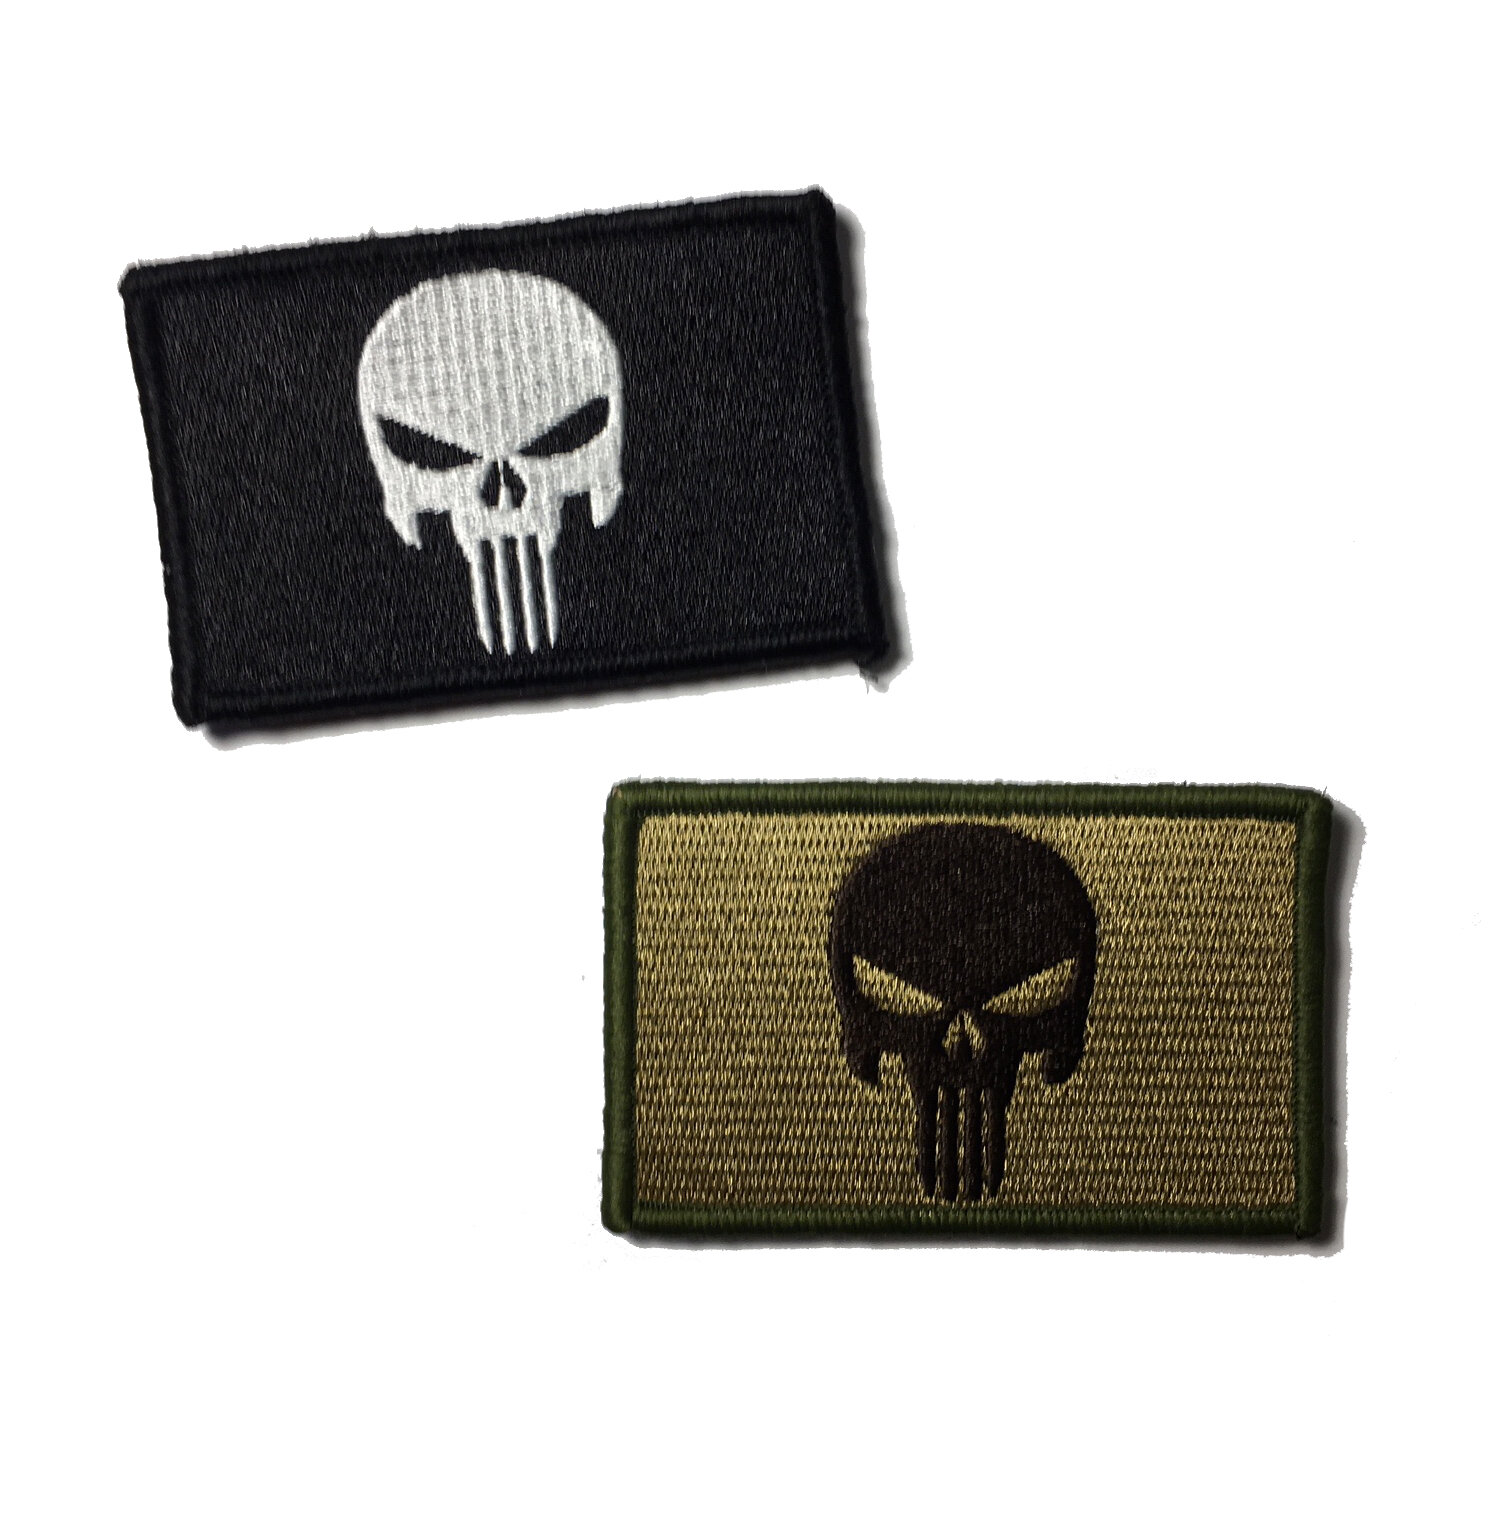 Kombat UK Tactical Punisher Infidel Patch Hook & Loop Military Army Style 